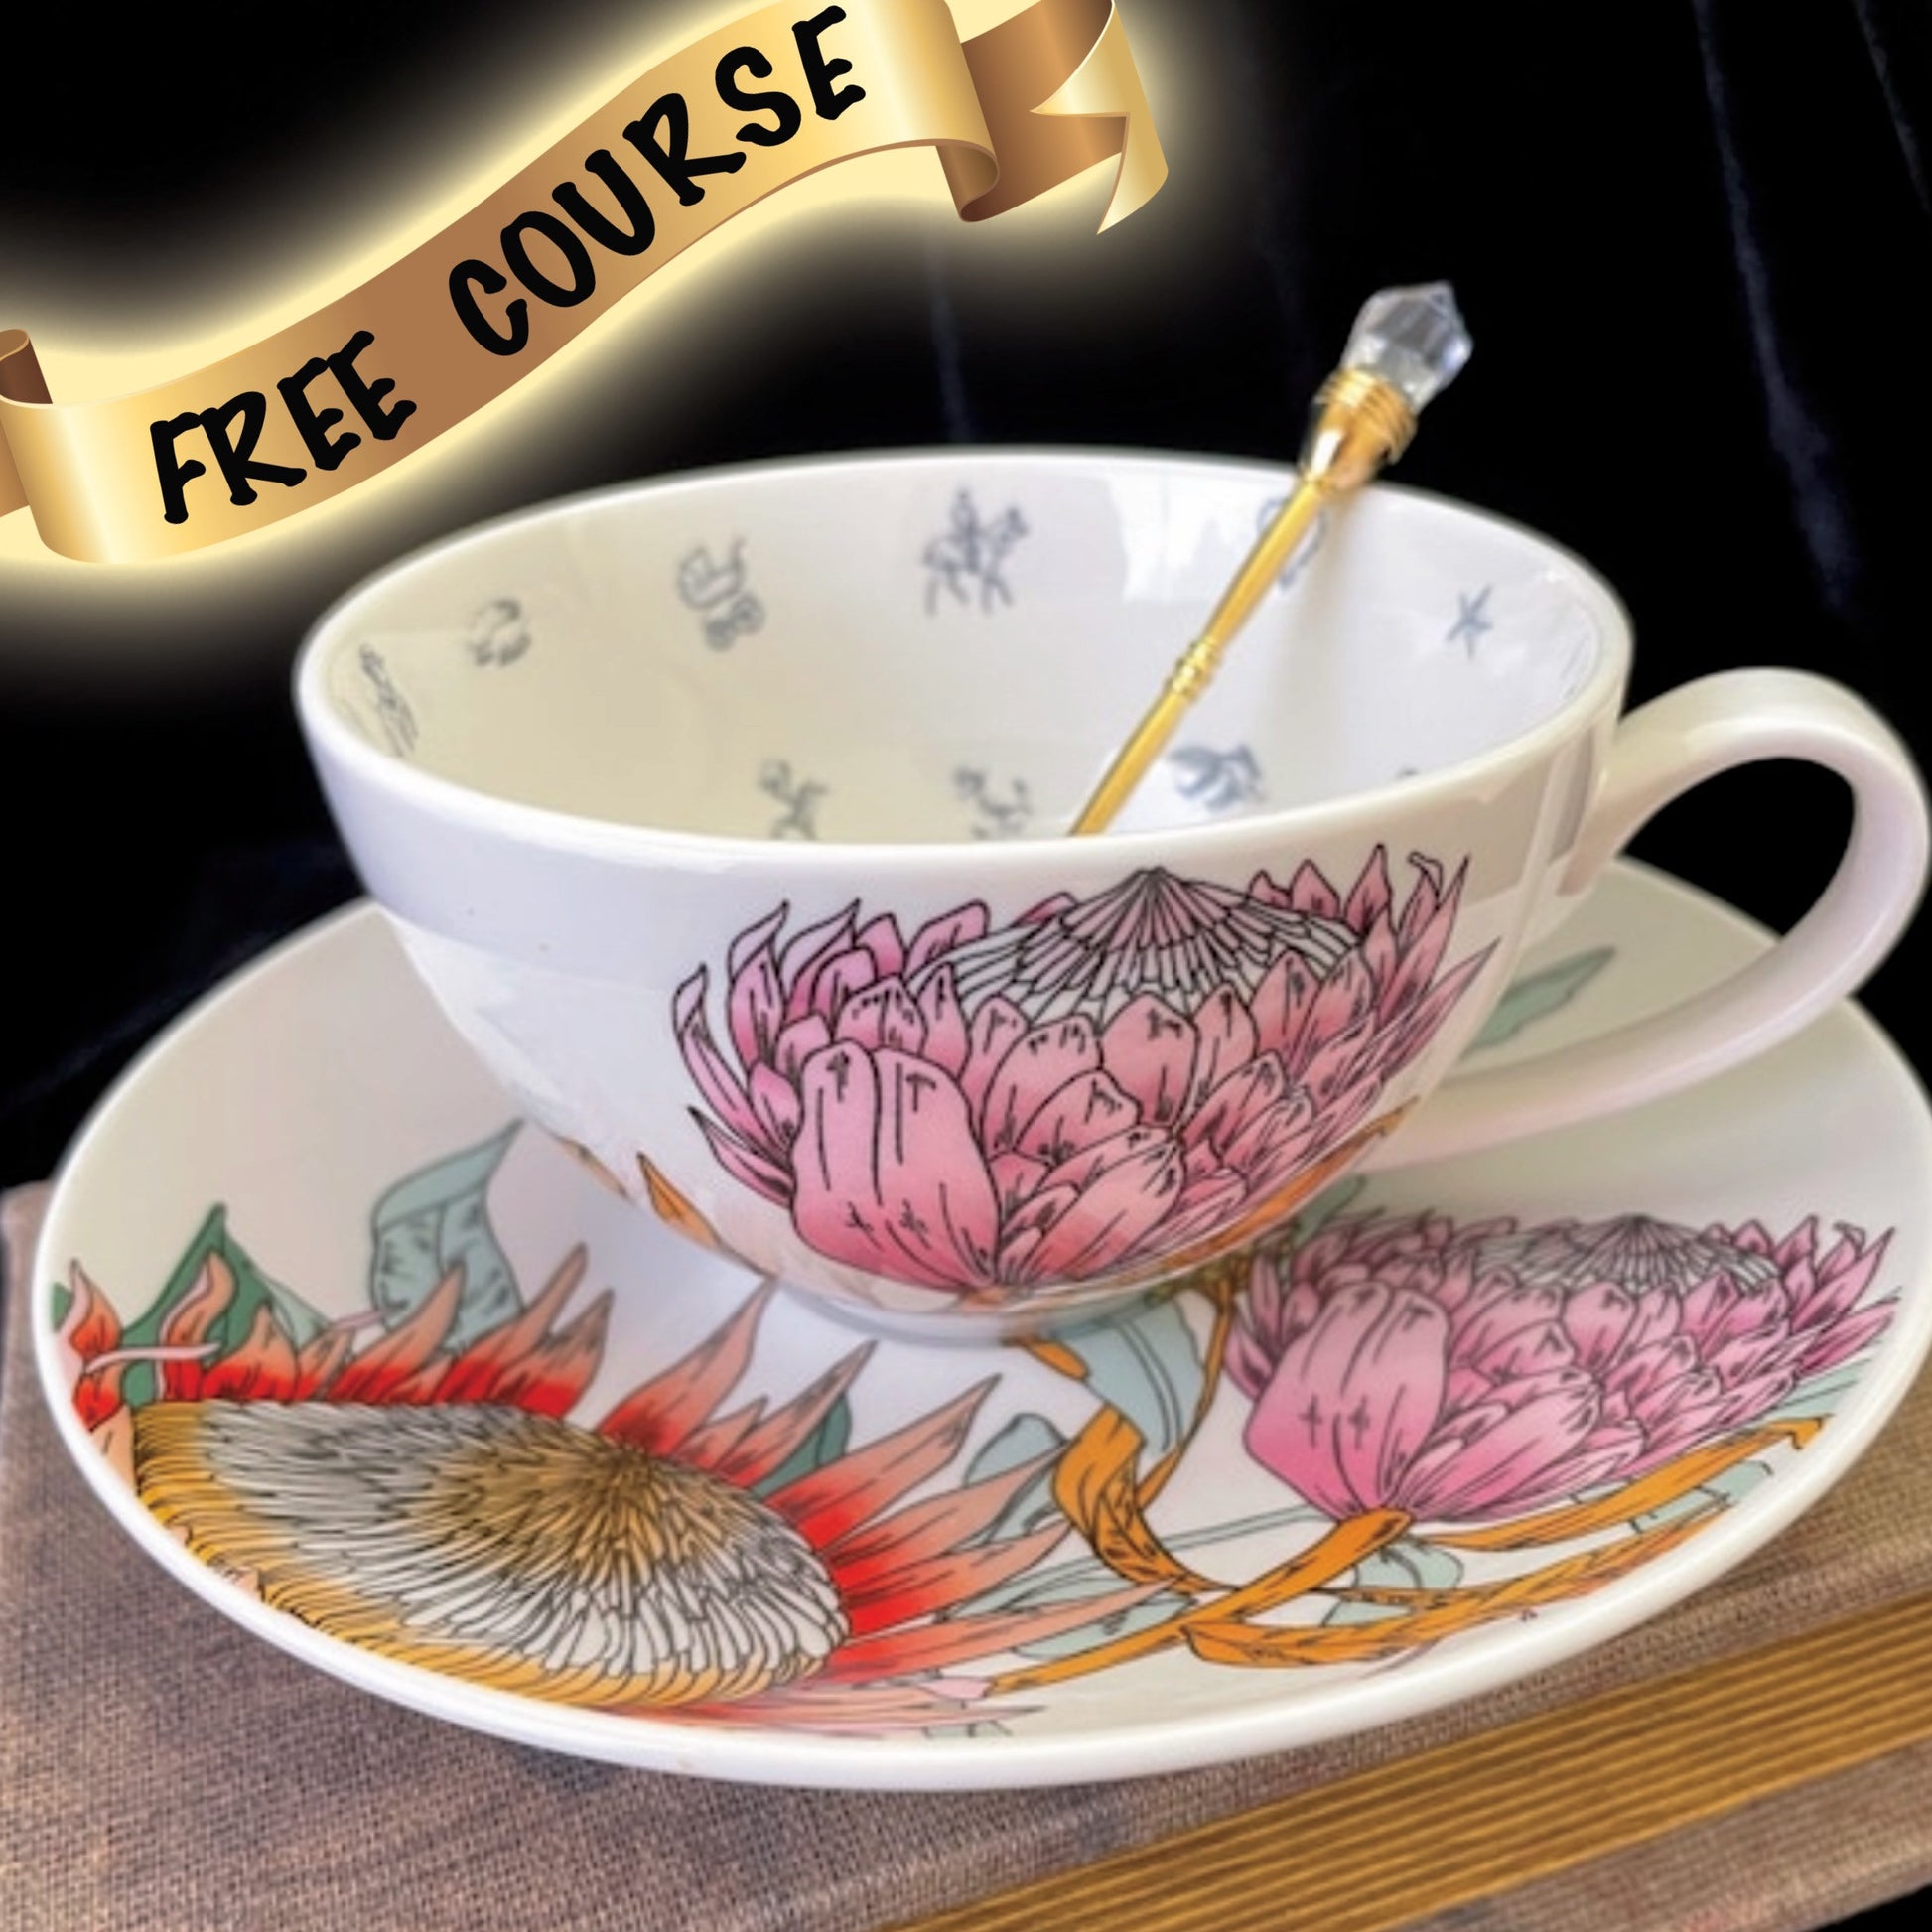 Australiana Tea cup and saucer set gift fortune telling teacup tarot tea party divination gift for female birthday mom witch Bridal party